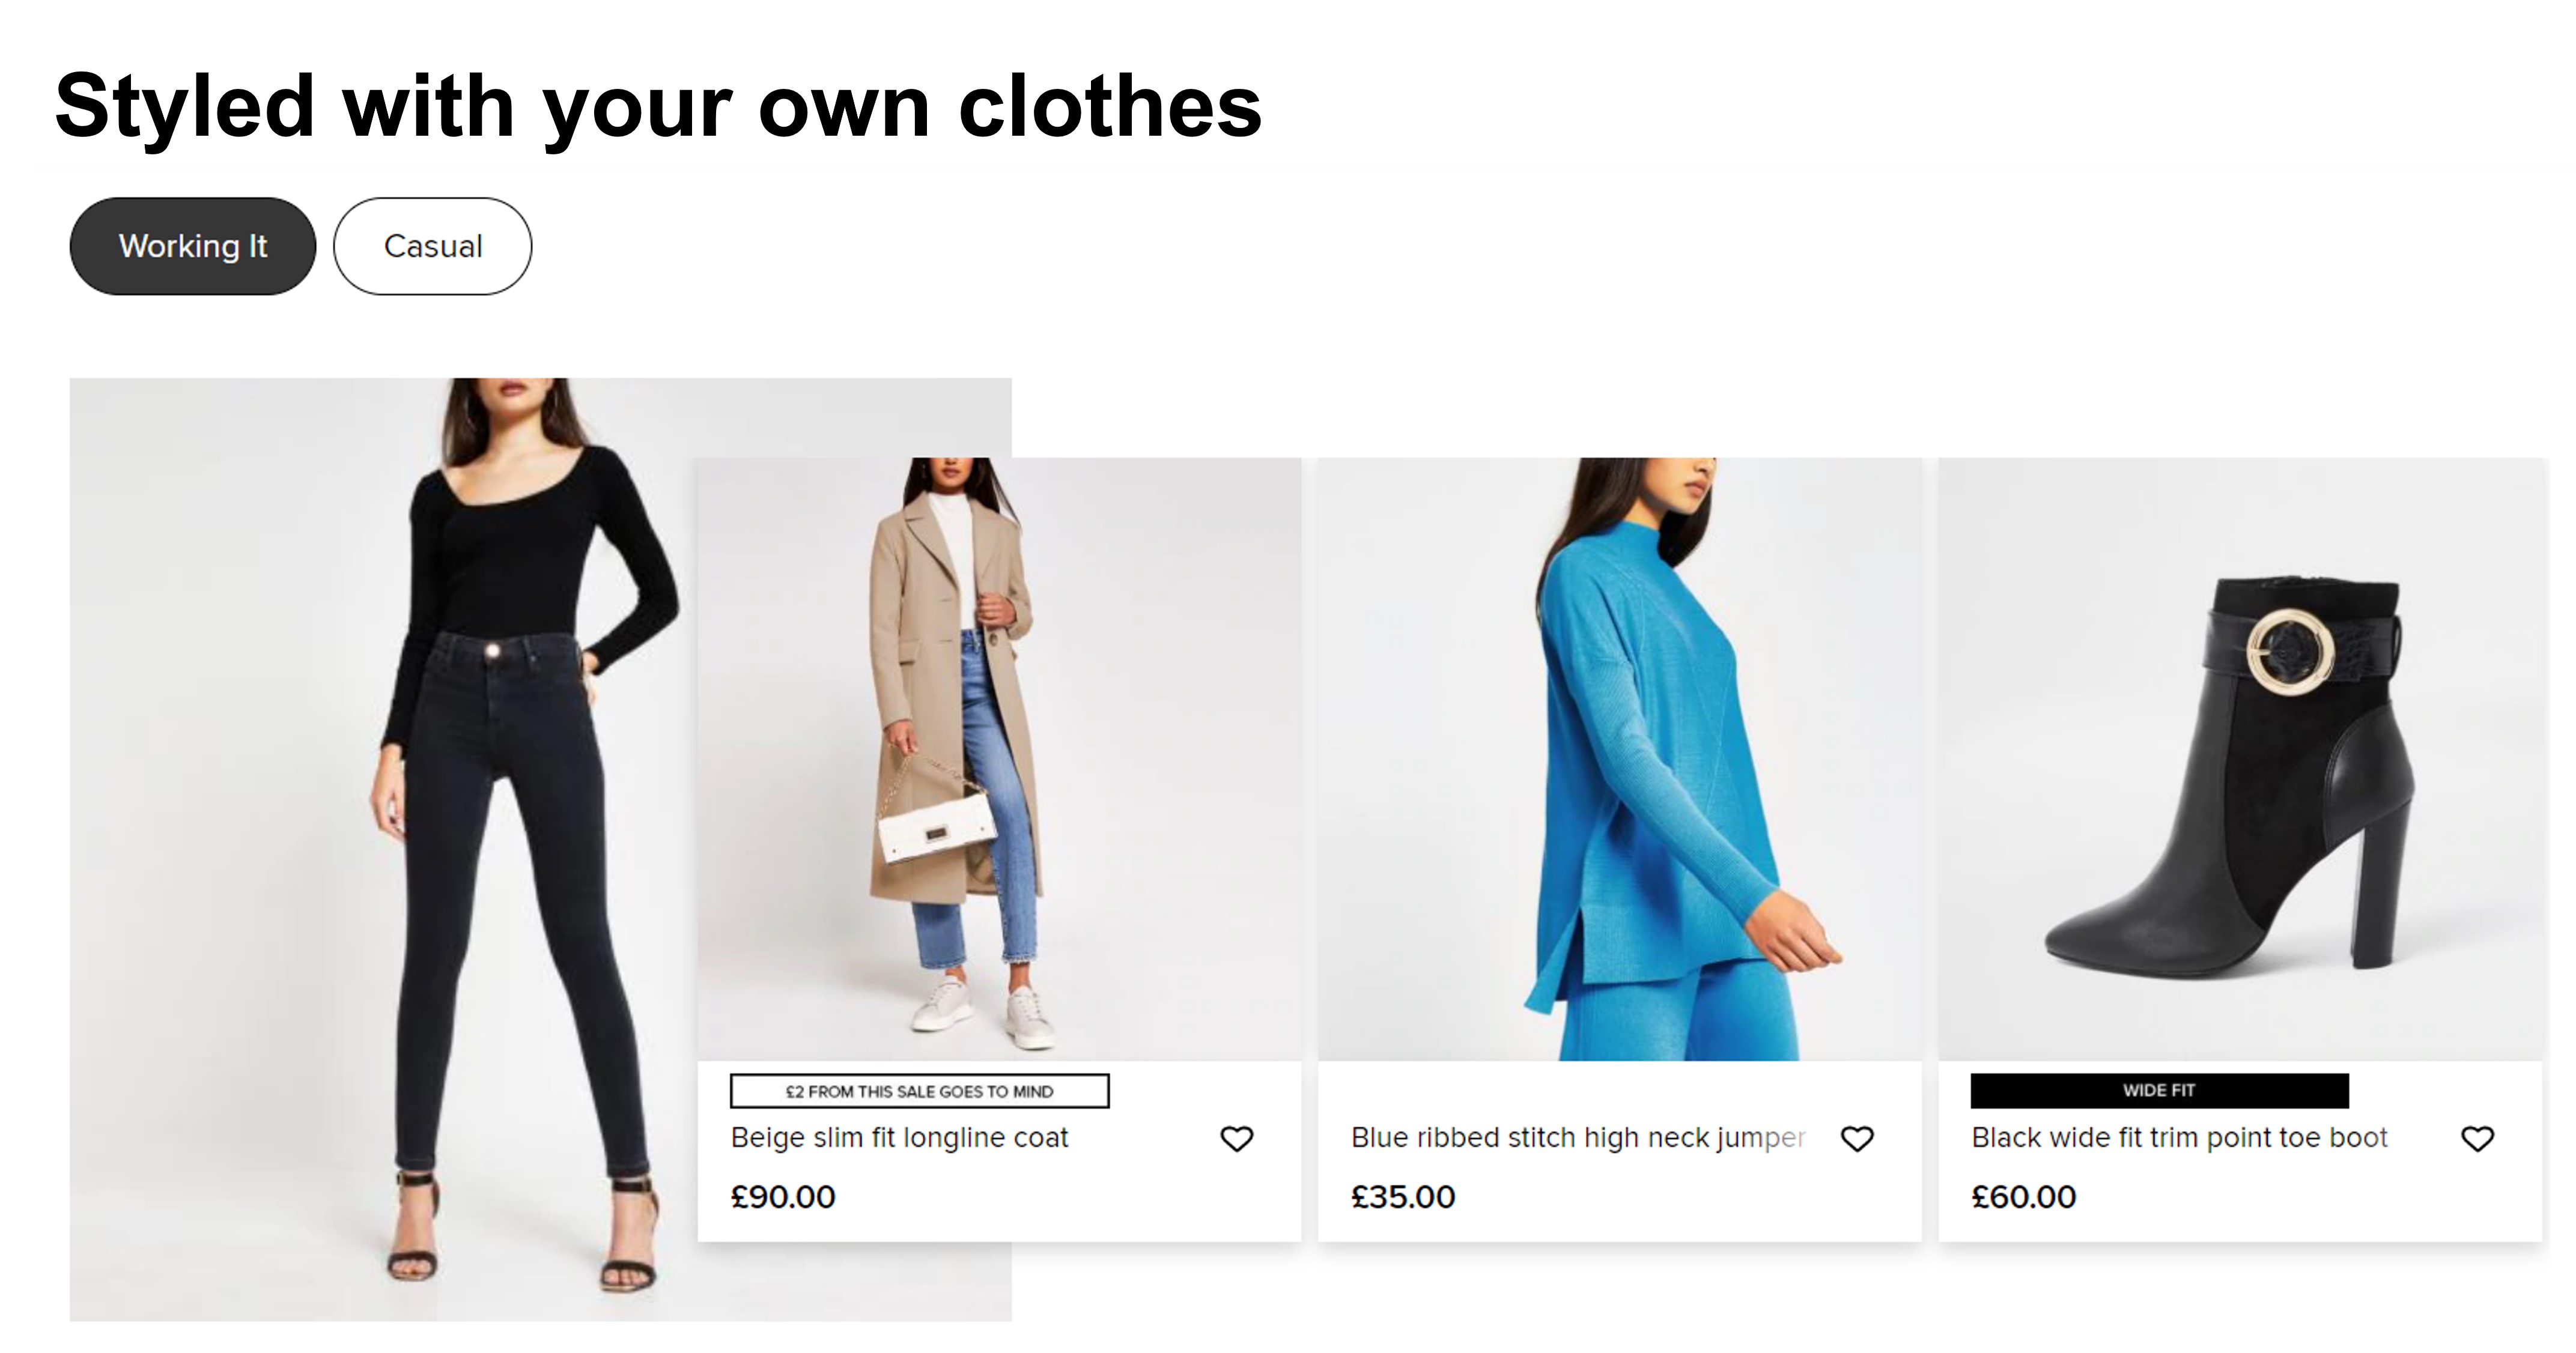 Example of a personalized outfit recommendation styled with your own clothes